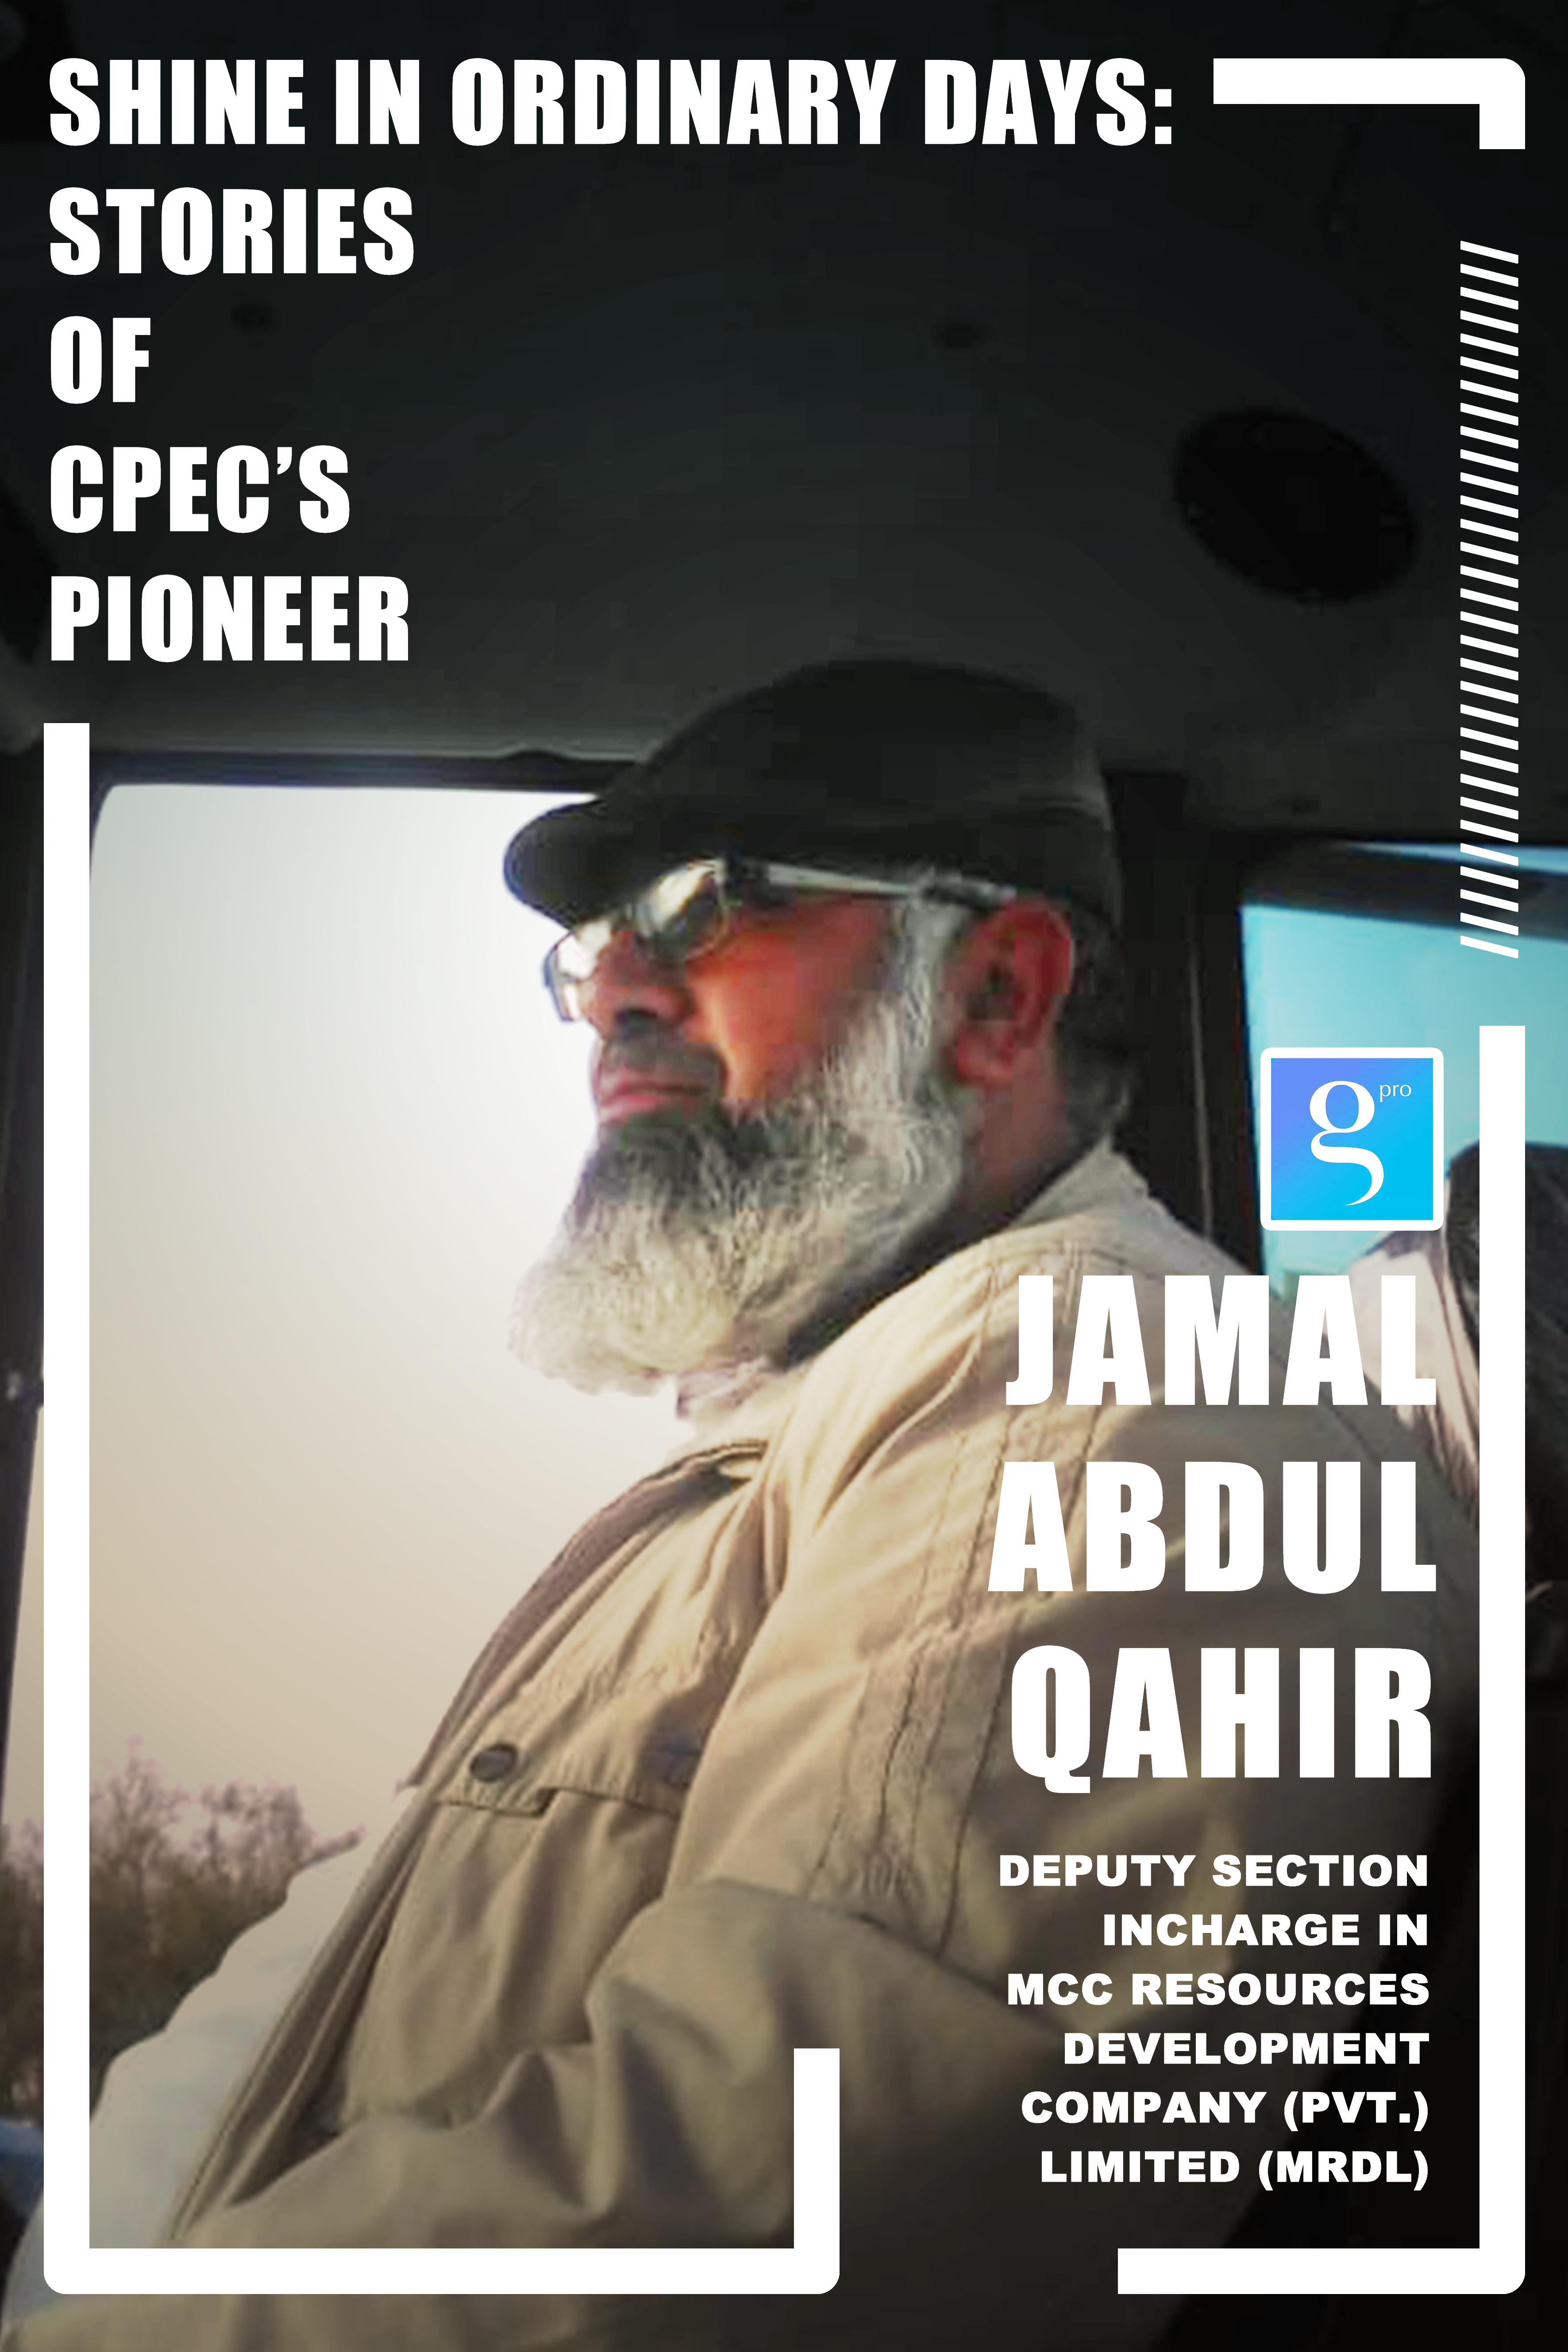 Shine in ordinary days: Stories of CPEC’s Pioneer